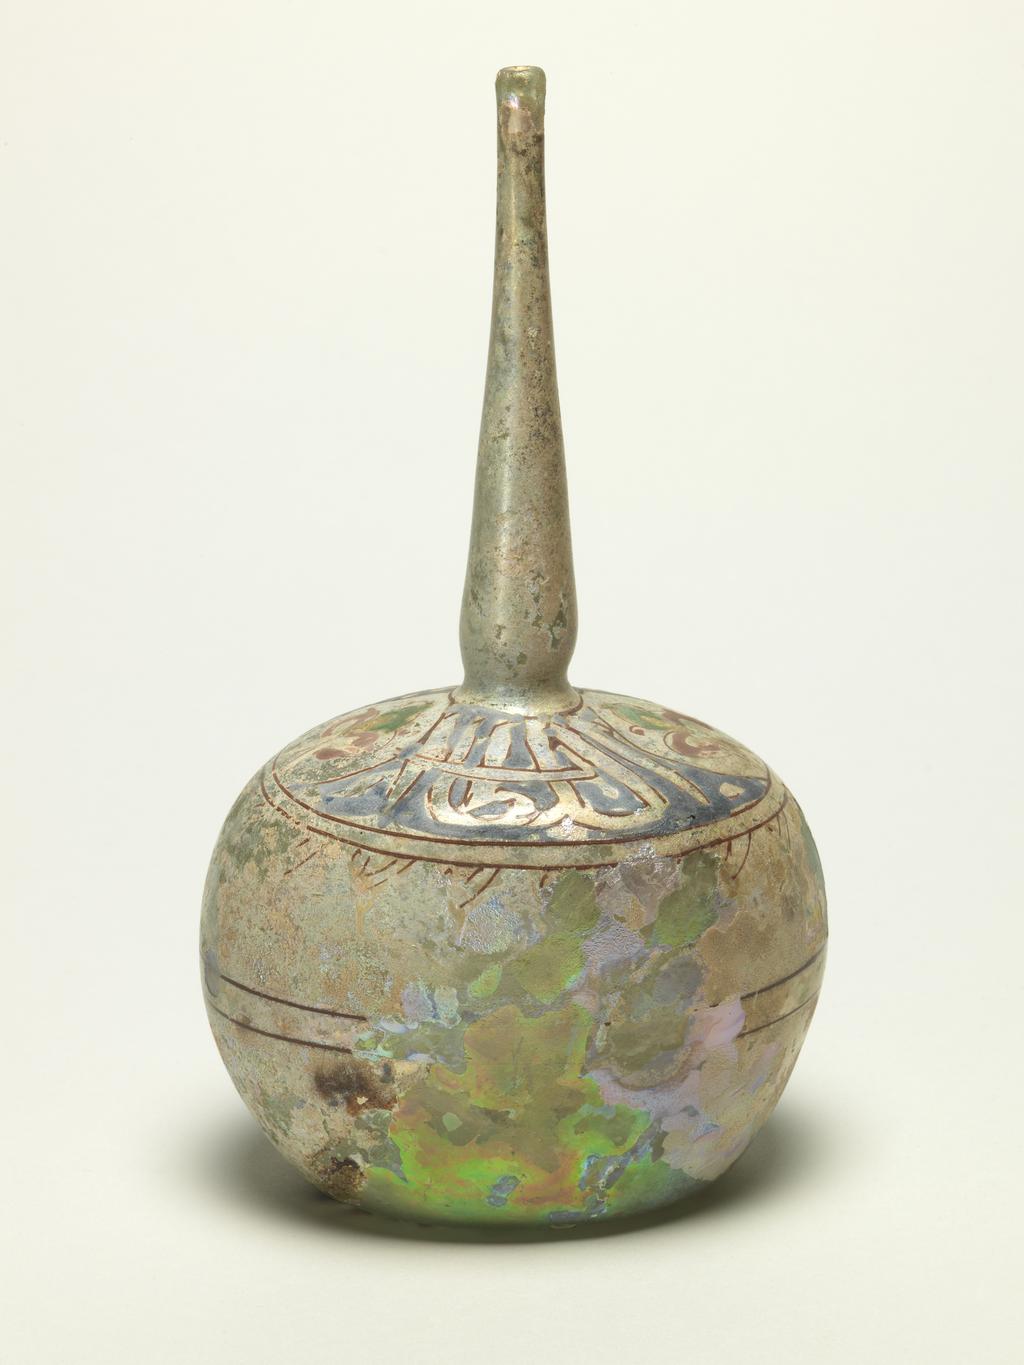 An image of Sprinkler Bottle. Unknown production, Syrian or Egyptian. Enamelled on the shoulder in blue, green, yellow and red with lotus flowers and the inscription 'Glory to our Lord, the Sultan'; traces of two bands of red enamel around the body. Clear blown glass with green tinge, enamelled, height, whole, 28.0 cm, diameter, whole, 11.5 cm, circa 1300-1400.